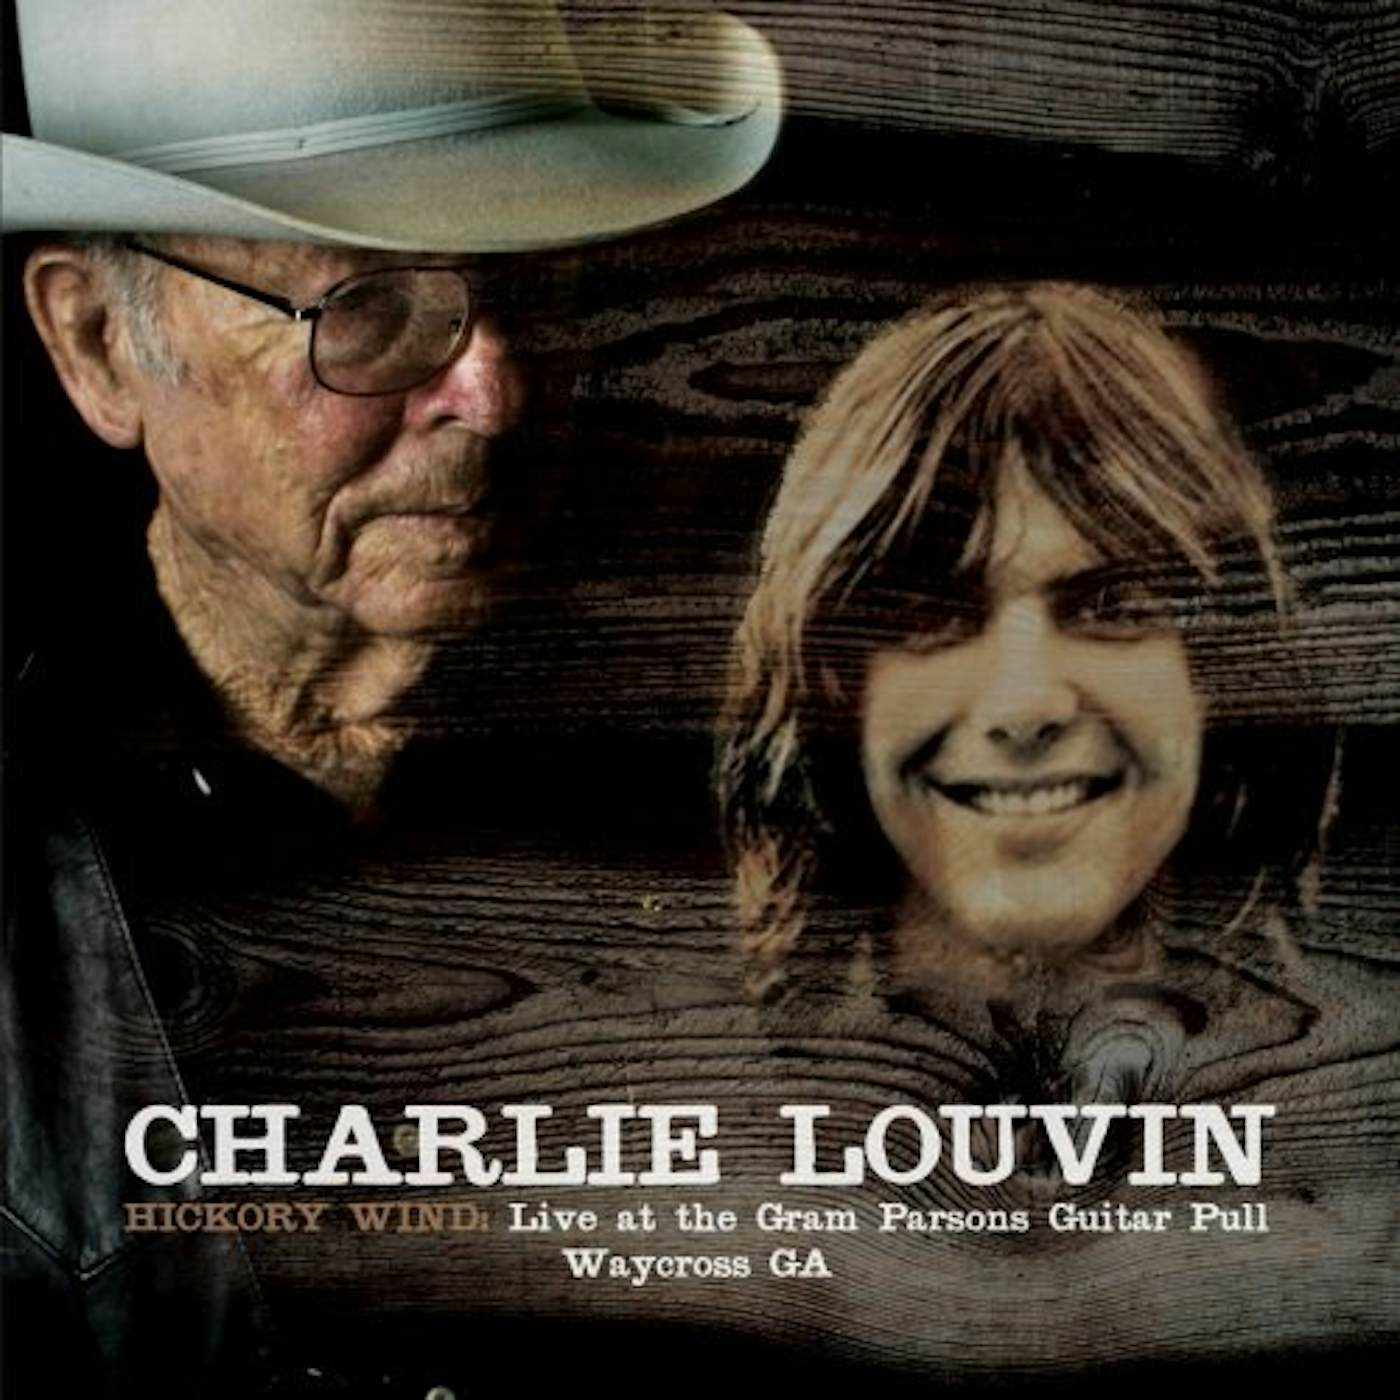 Charlie Louvin HICKORY WIND: LIVE AT THE GRAM PARSONS GUITAR PULL CD